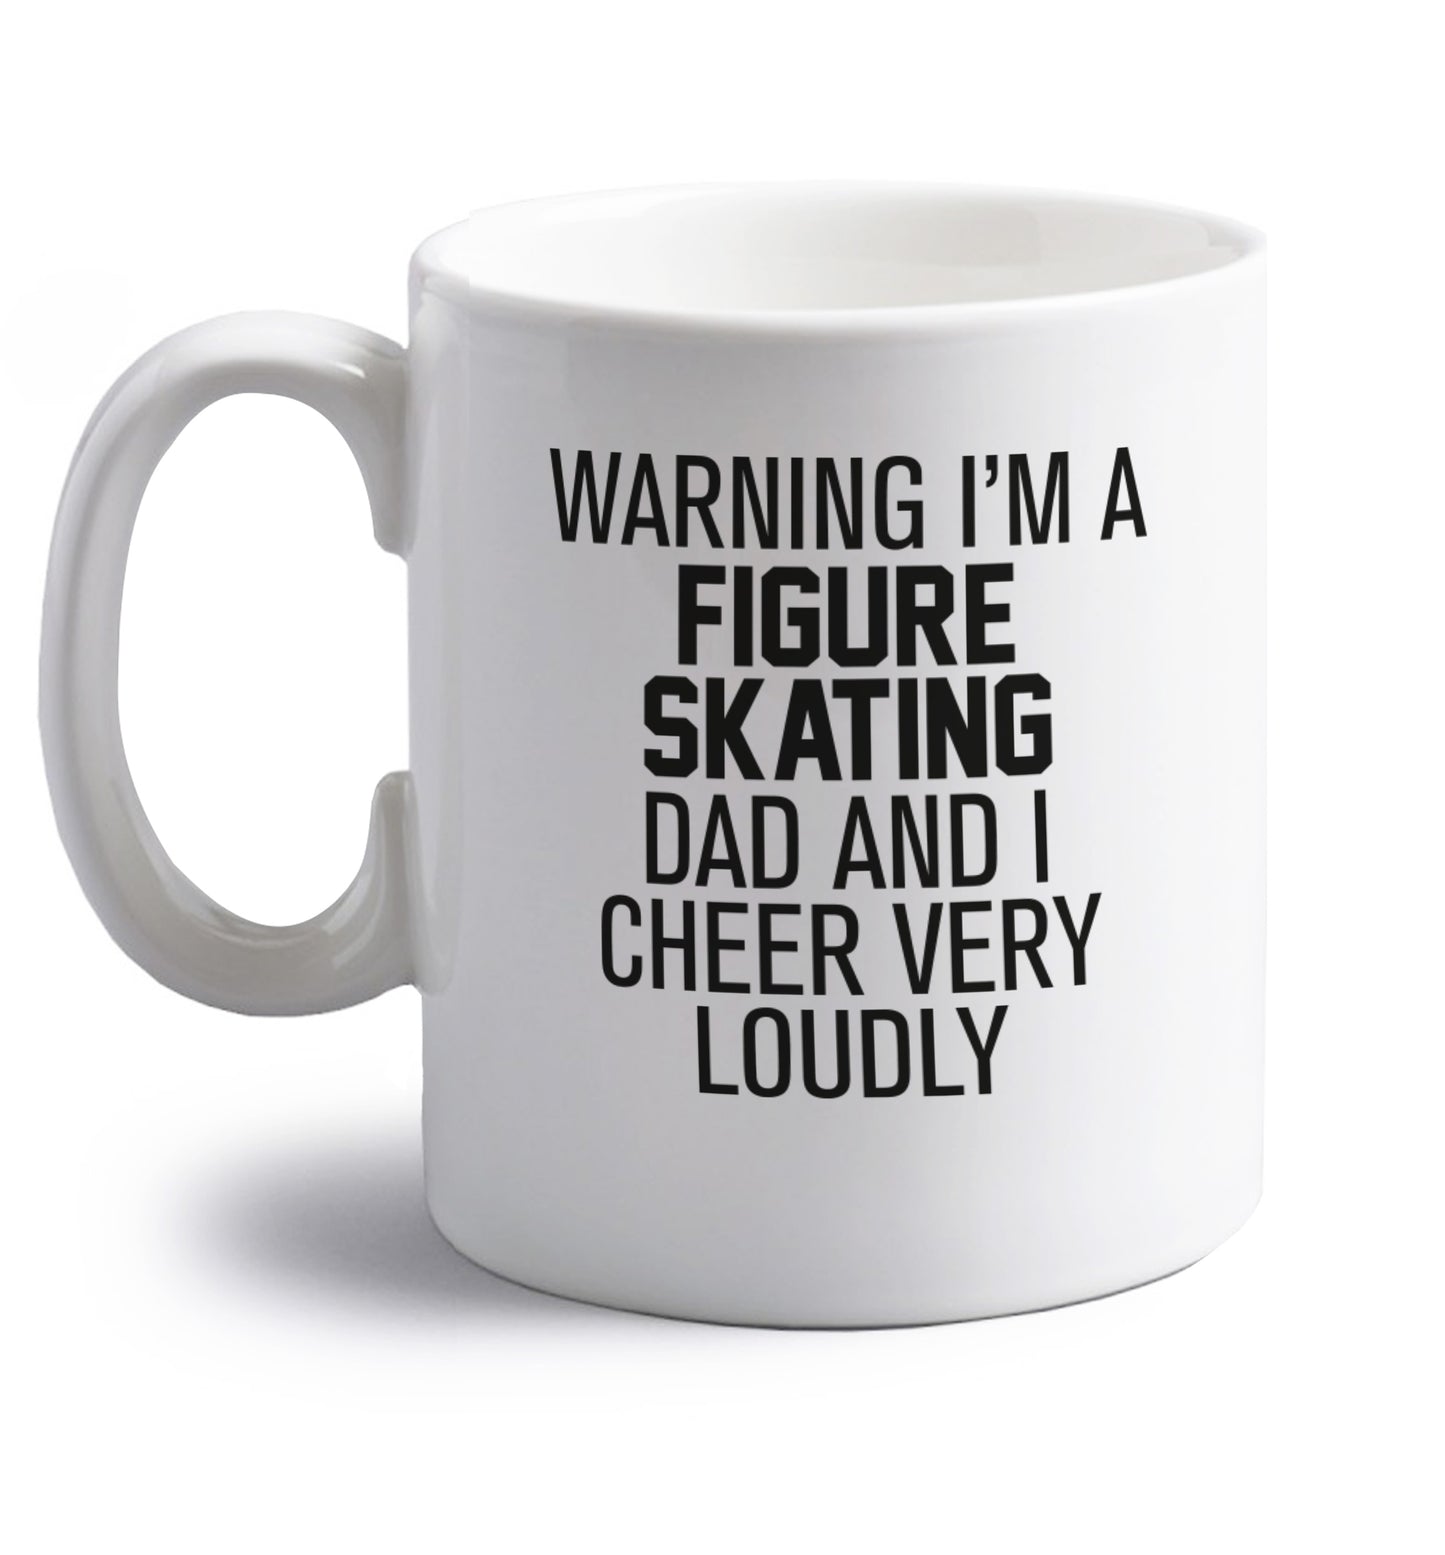 Warning I'm a figure skating dad and I cheer very loudly right handed white ceramic mug 